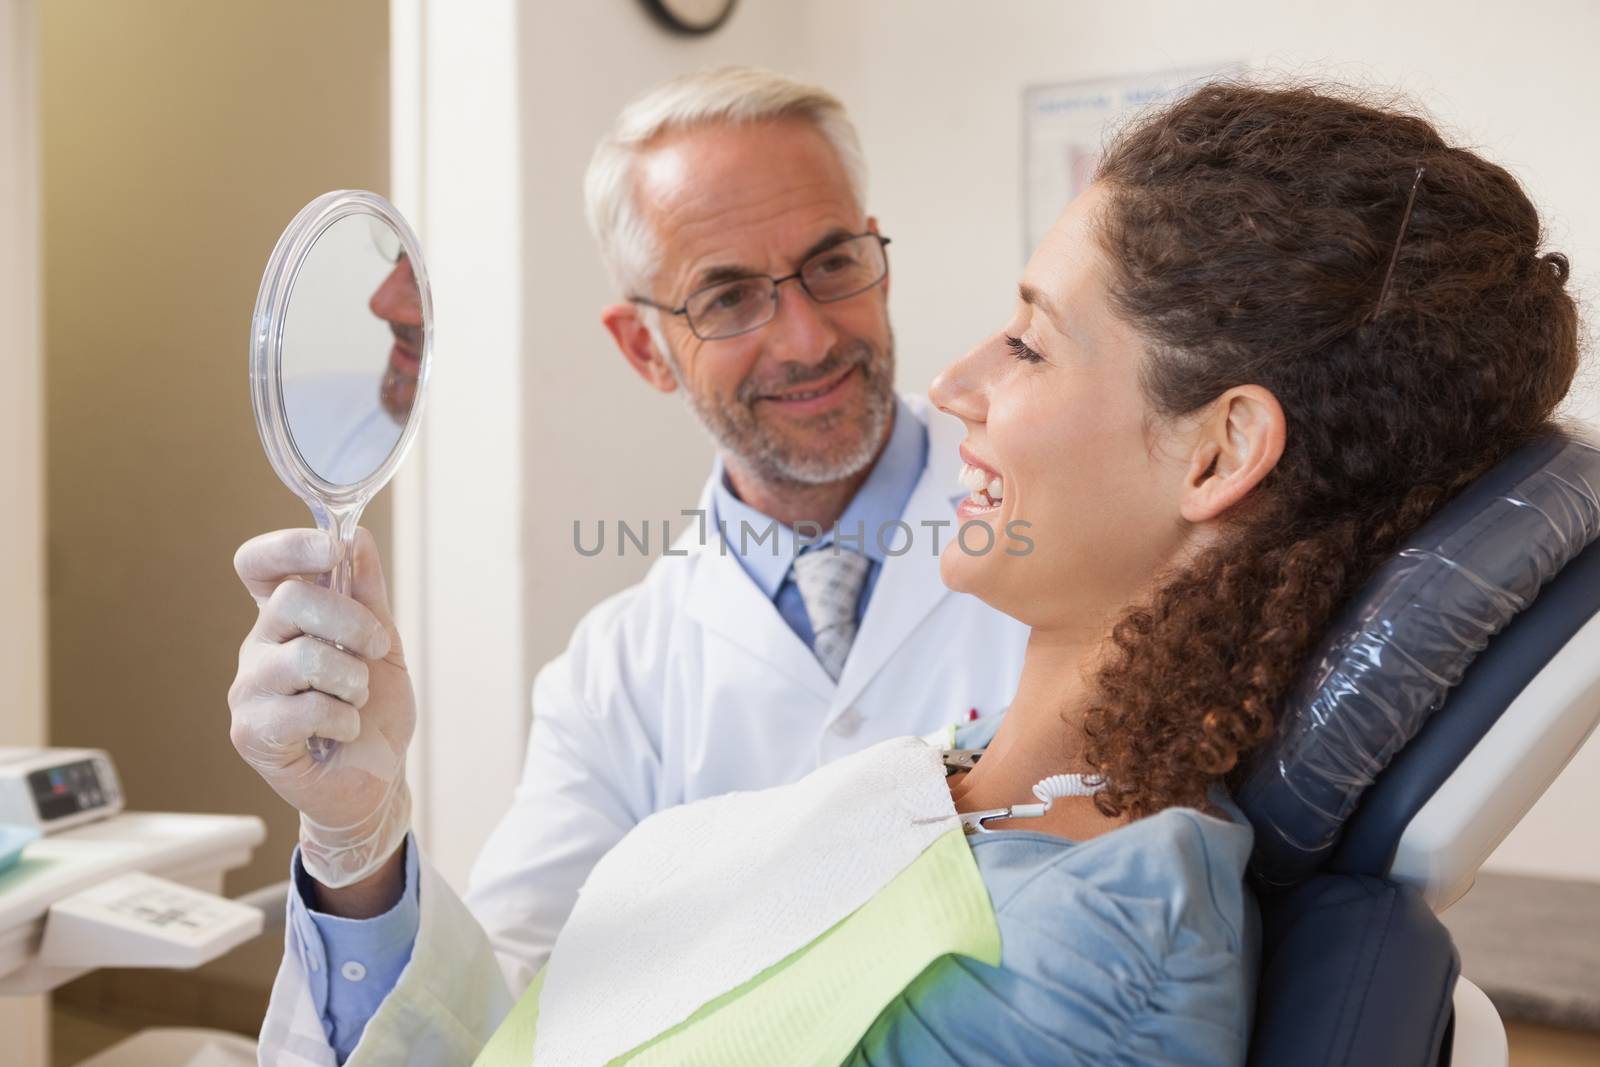 Patient admiring her new smile in the mirror by Wavebreakmedia